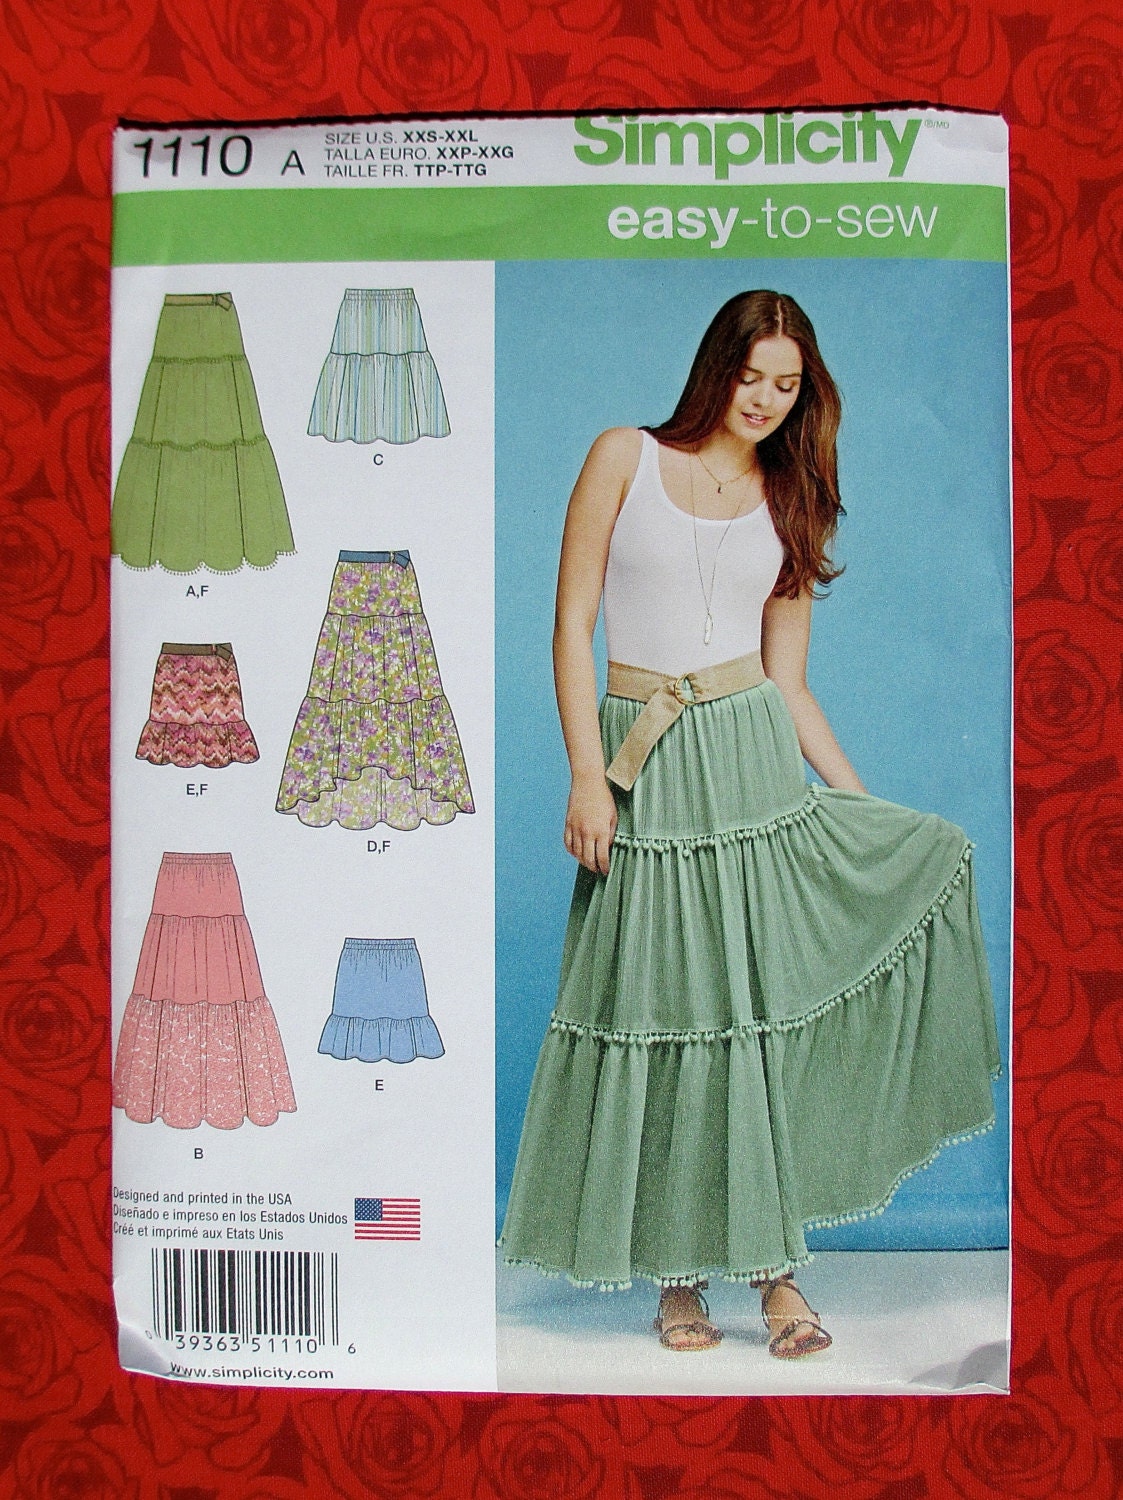 Simplicity Sewing Pattern 1110 Tiered Skirt by AlicesSewingCorner